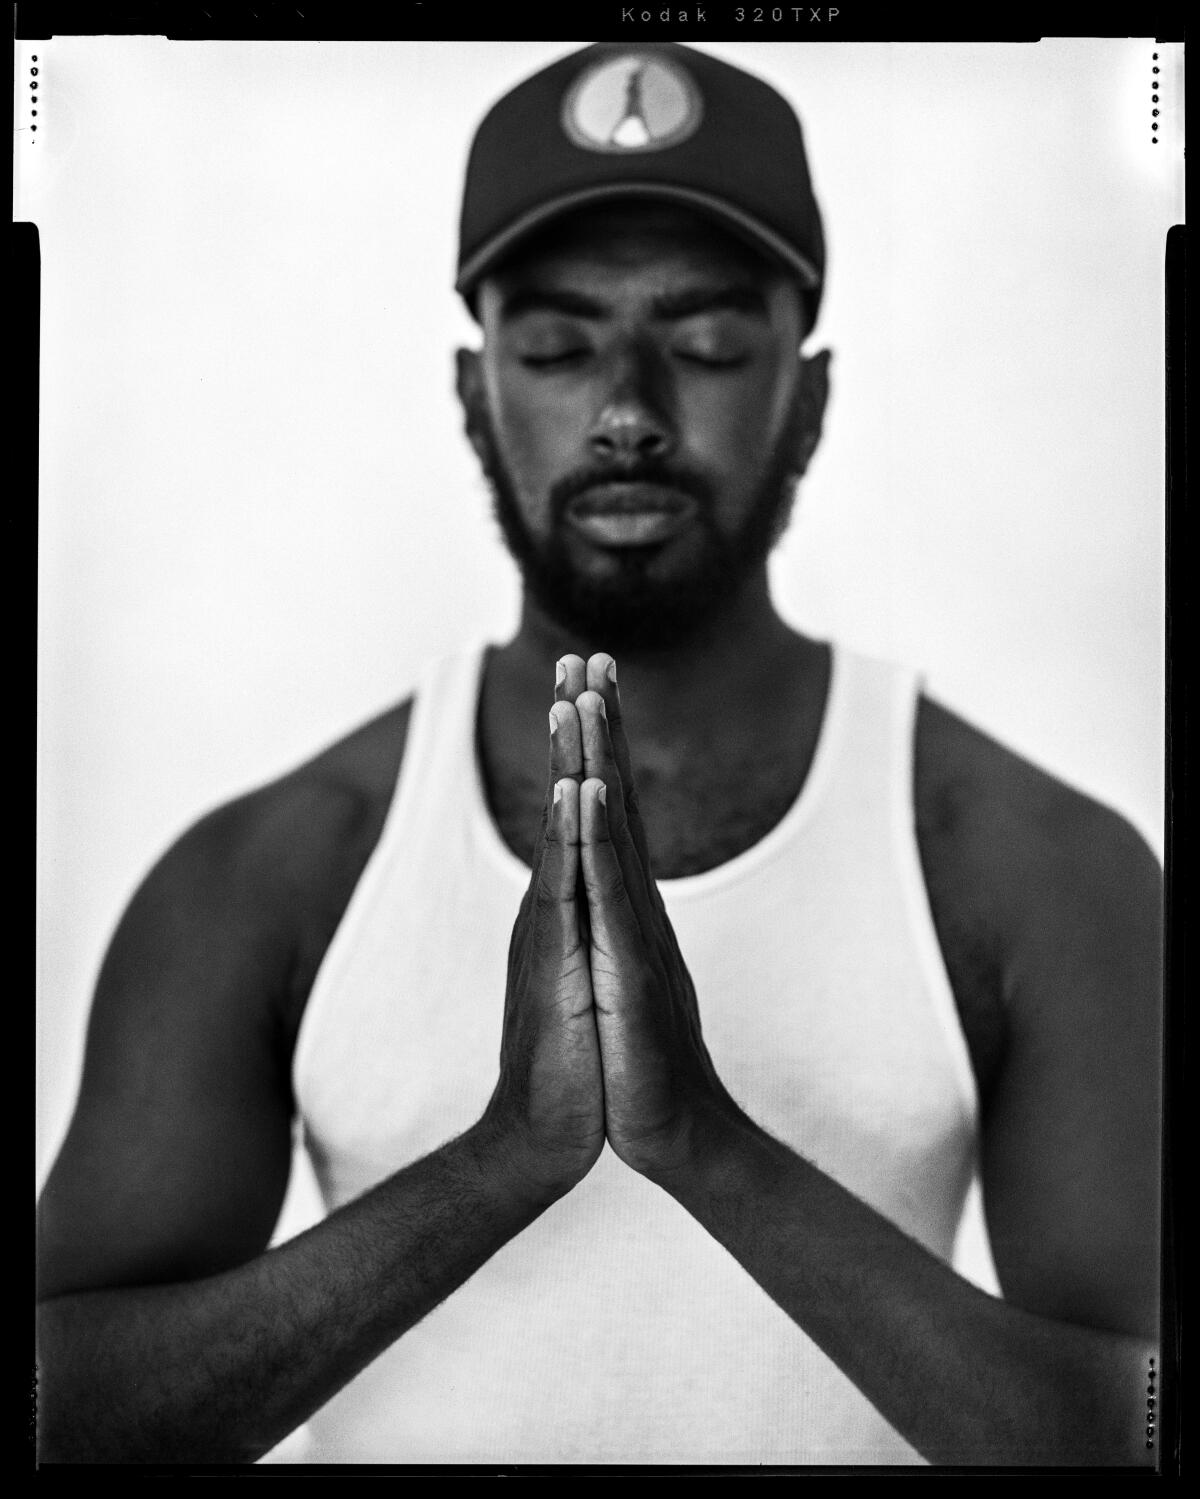 Black and white film photo of a Black man, Etienne Maurice, holding a yoga pose